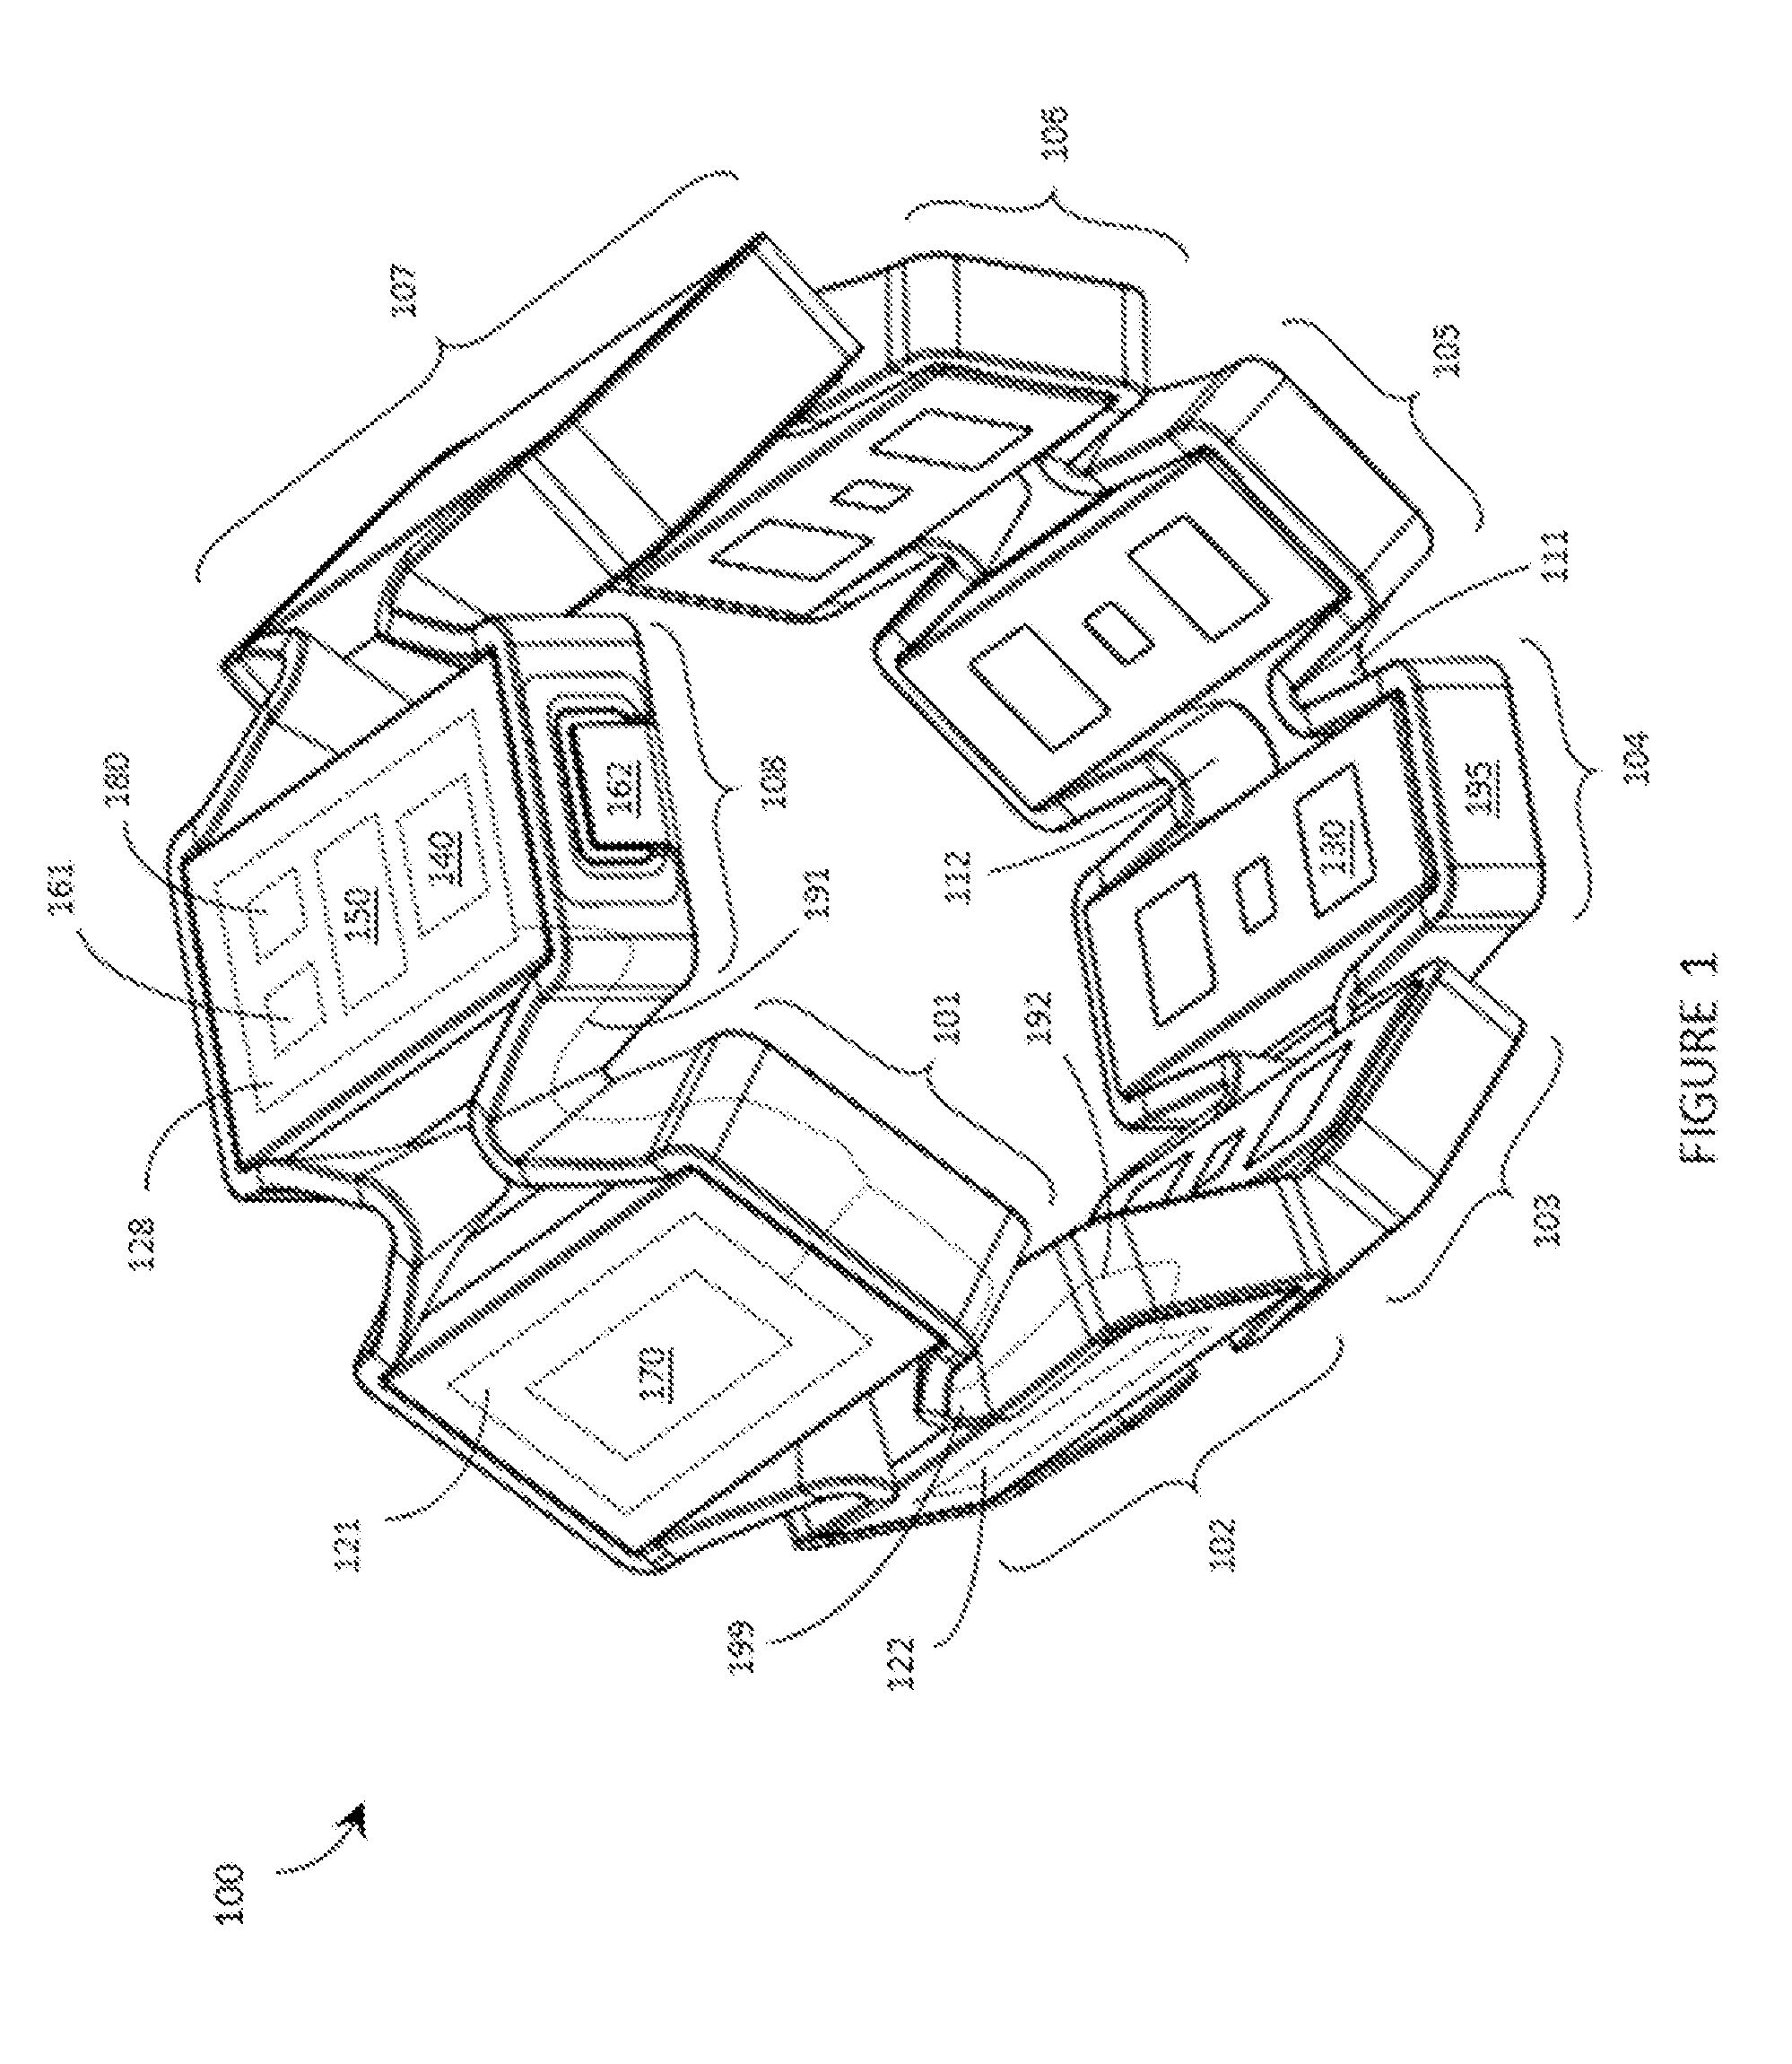 Systems, articles, and methods for elastic electrical cables and wearable electronic devices employing same